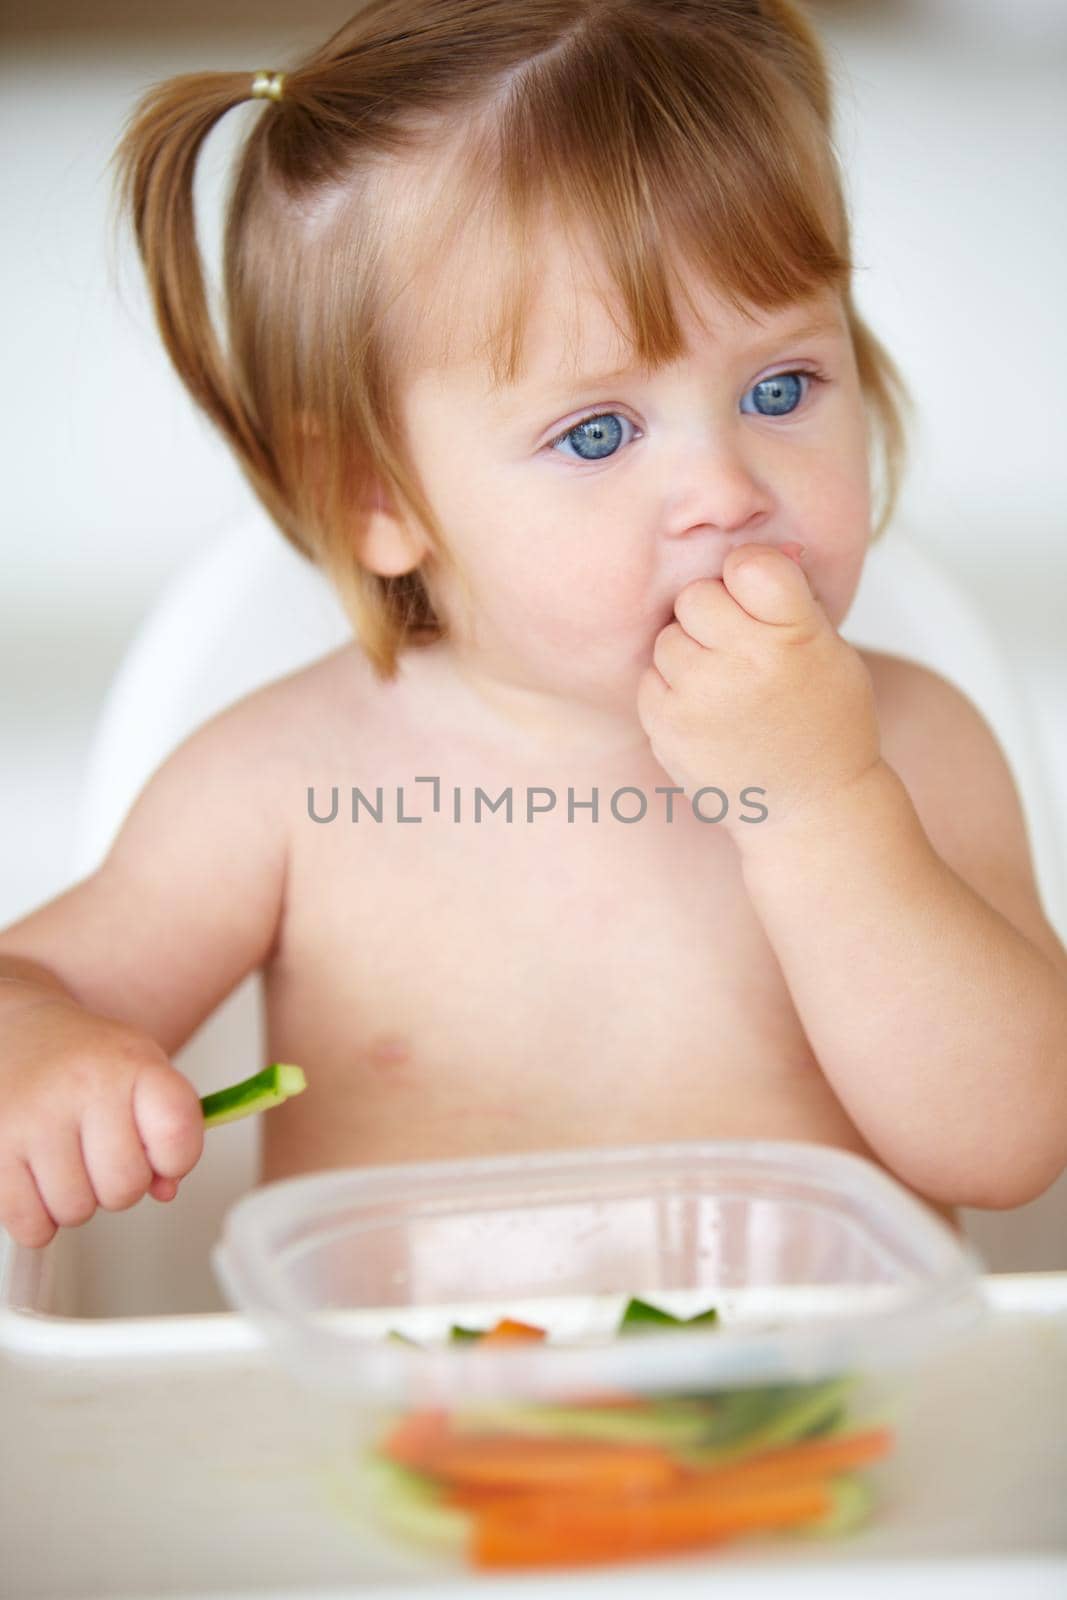 Enjoying veggies from an early age. A cute little girl eating vegetables. by YuriArcurs